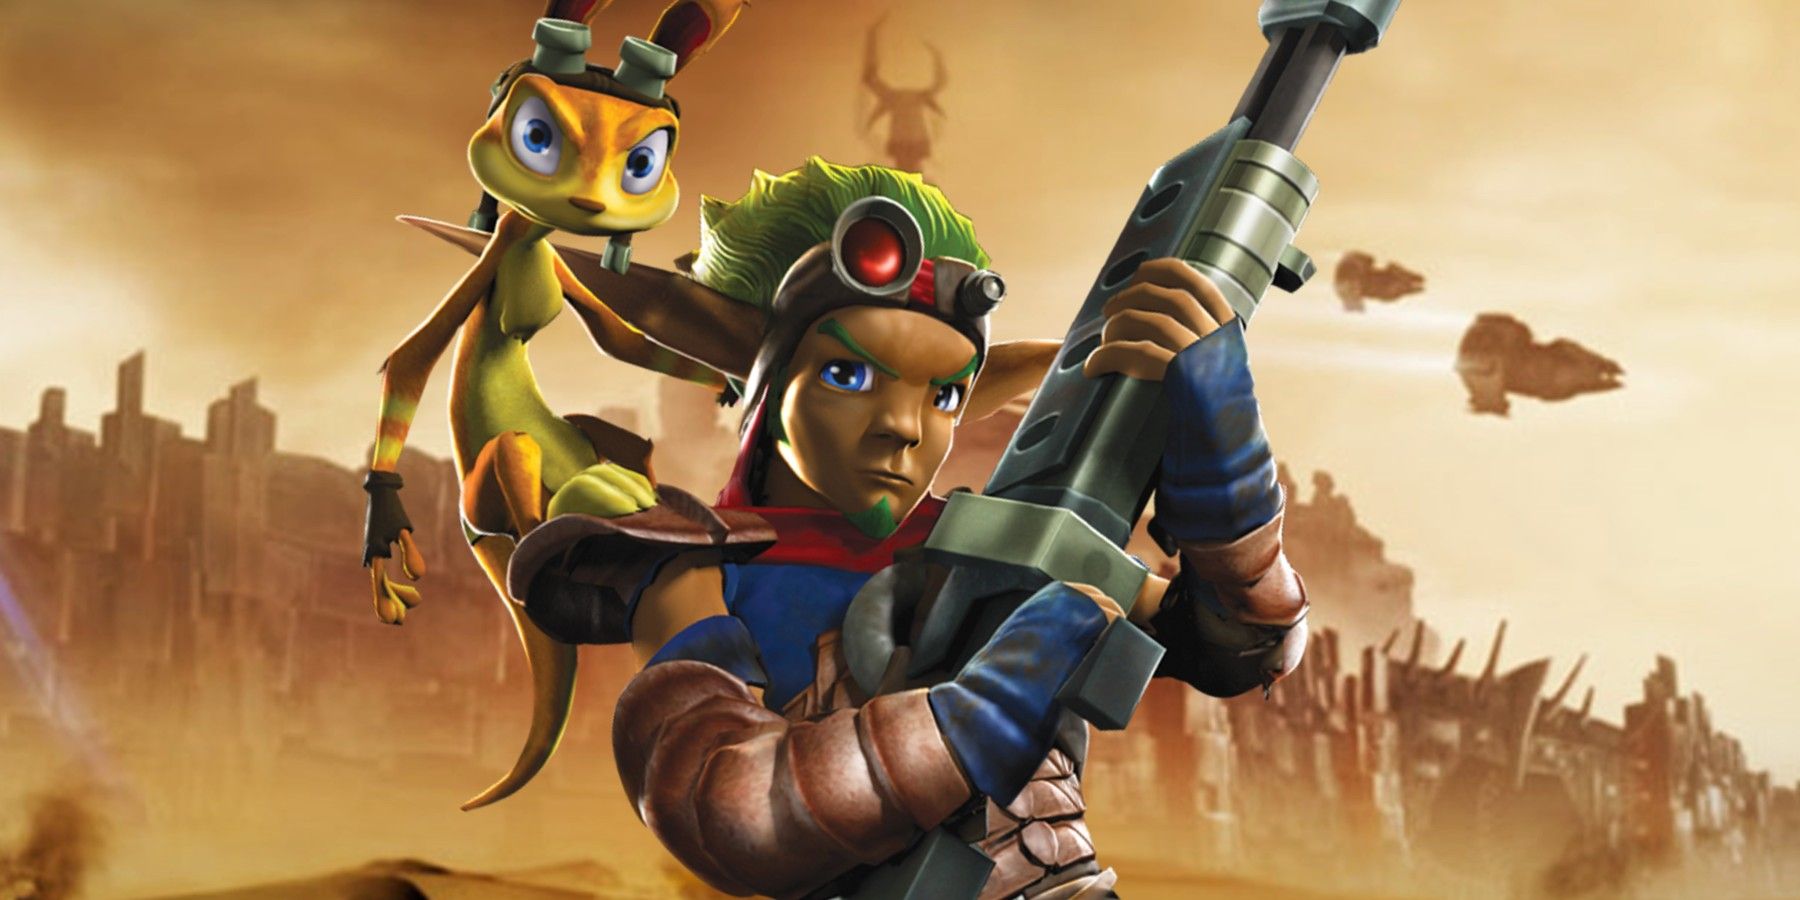 Jak and Daxter protagonists from the saga